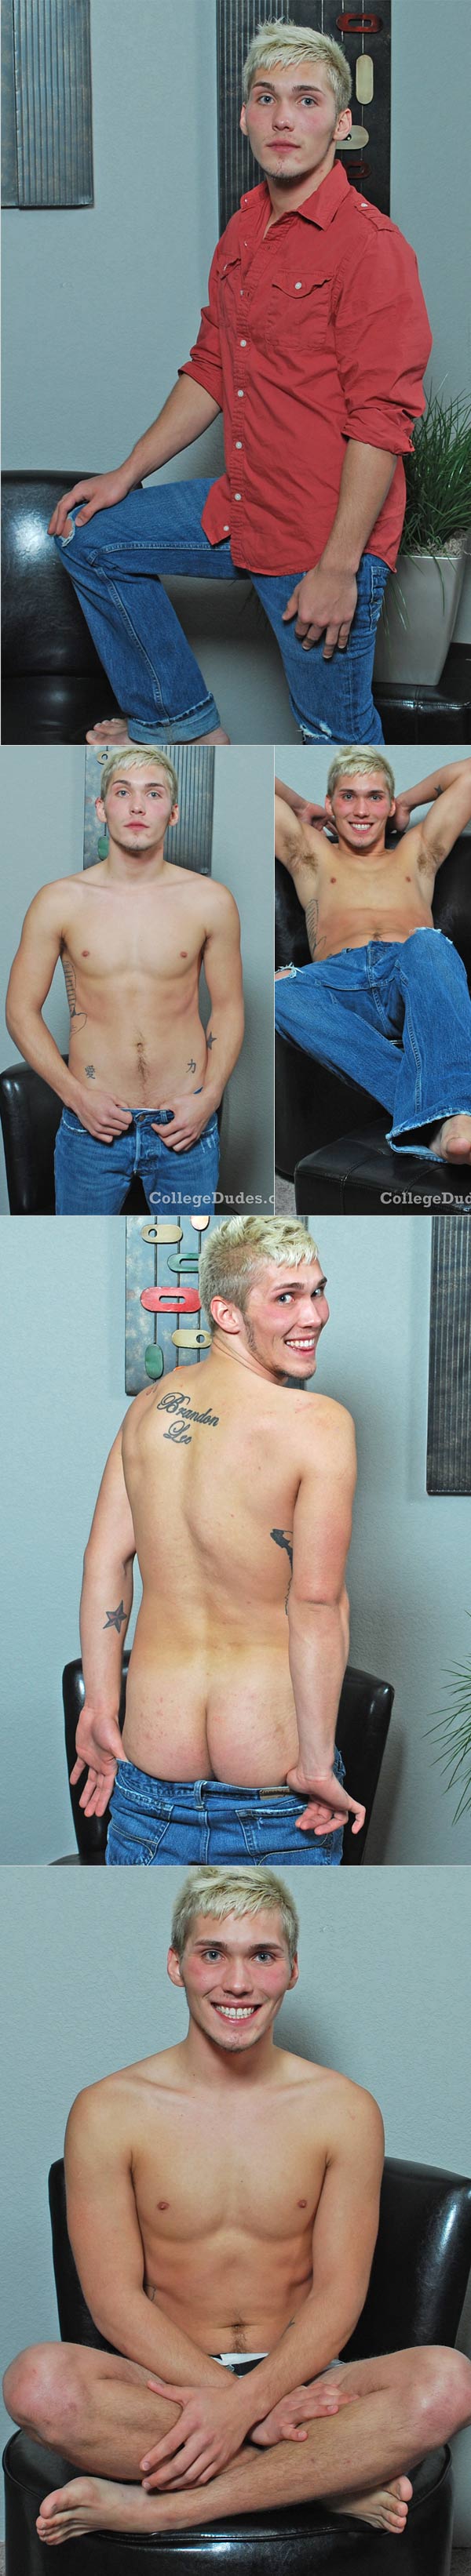 Brandon Bloom (Busts A Nut) at CollegeDudes.com